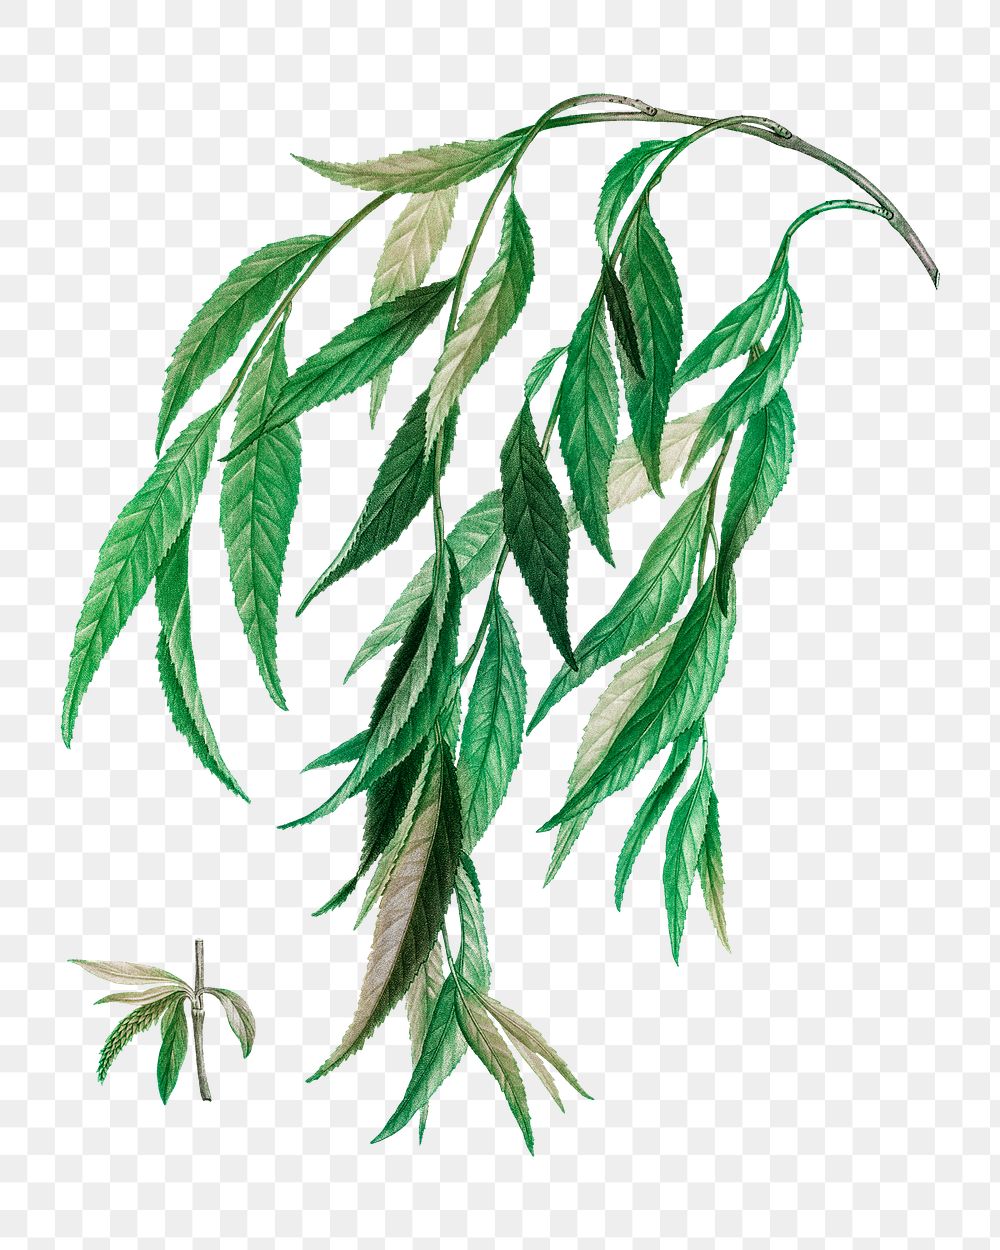 Weeping willow branch transparent png